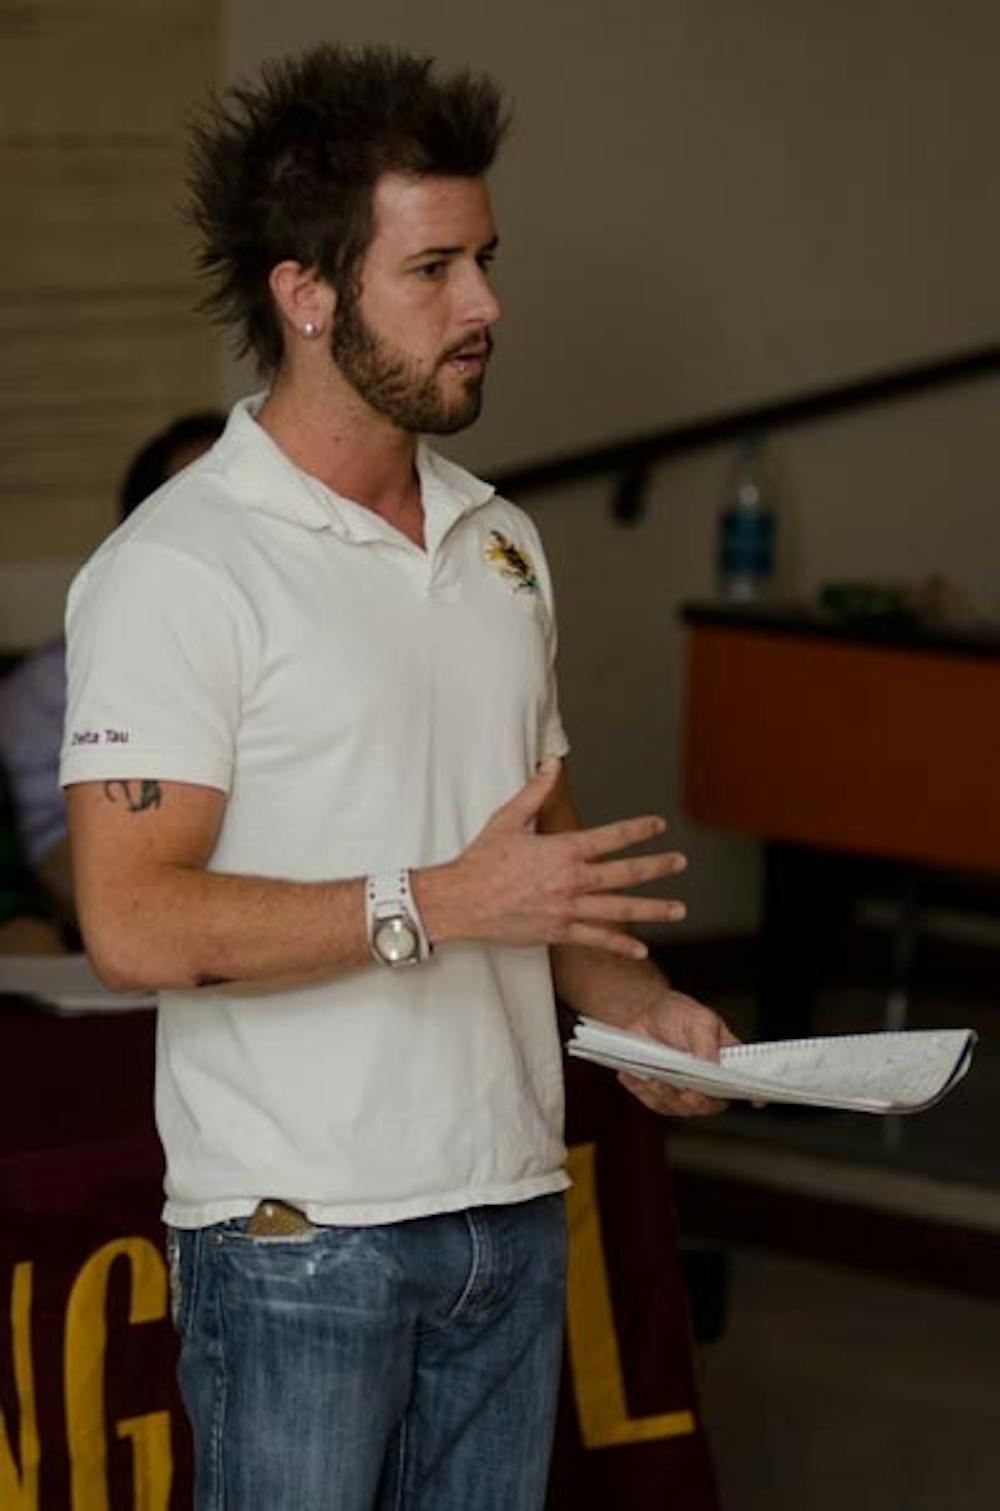 LOSING A LITTLE BROTHER: Tyler Miesch spoke, Tuesday night, at a discussion on the Tempe campus trying to prevent deaths related to the misuse of prescription drugs. Miesch was the fraternity brother of Joey Rovero who died in 2009 from misuse of perscription drugs. (Photo by Aaron Lavinsky)